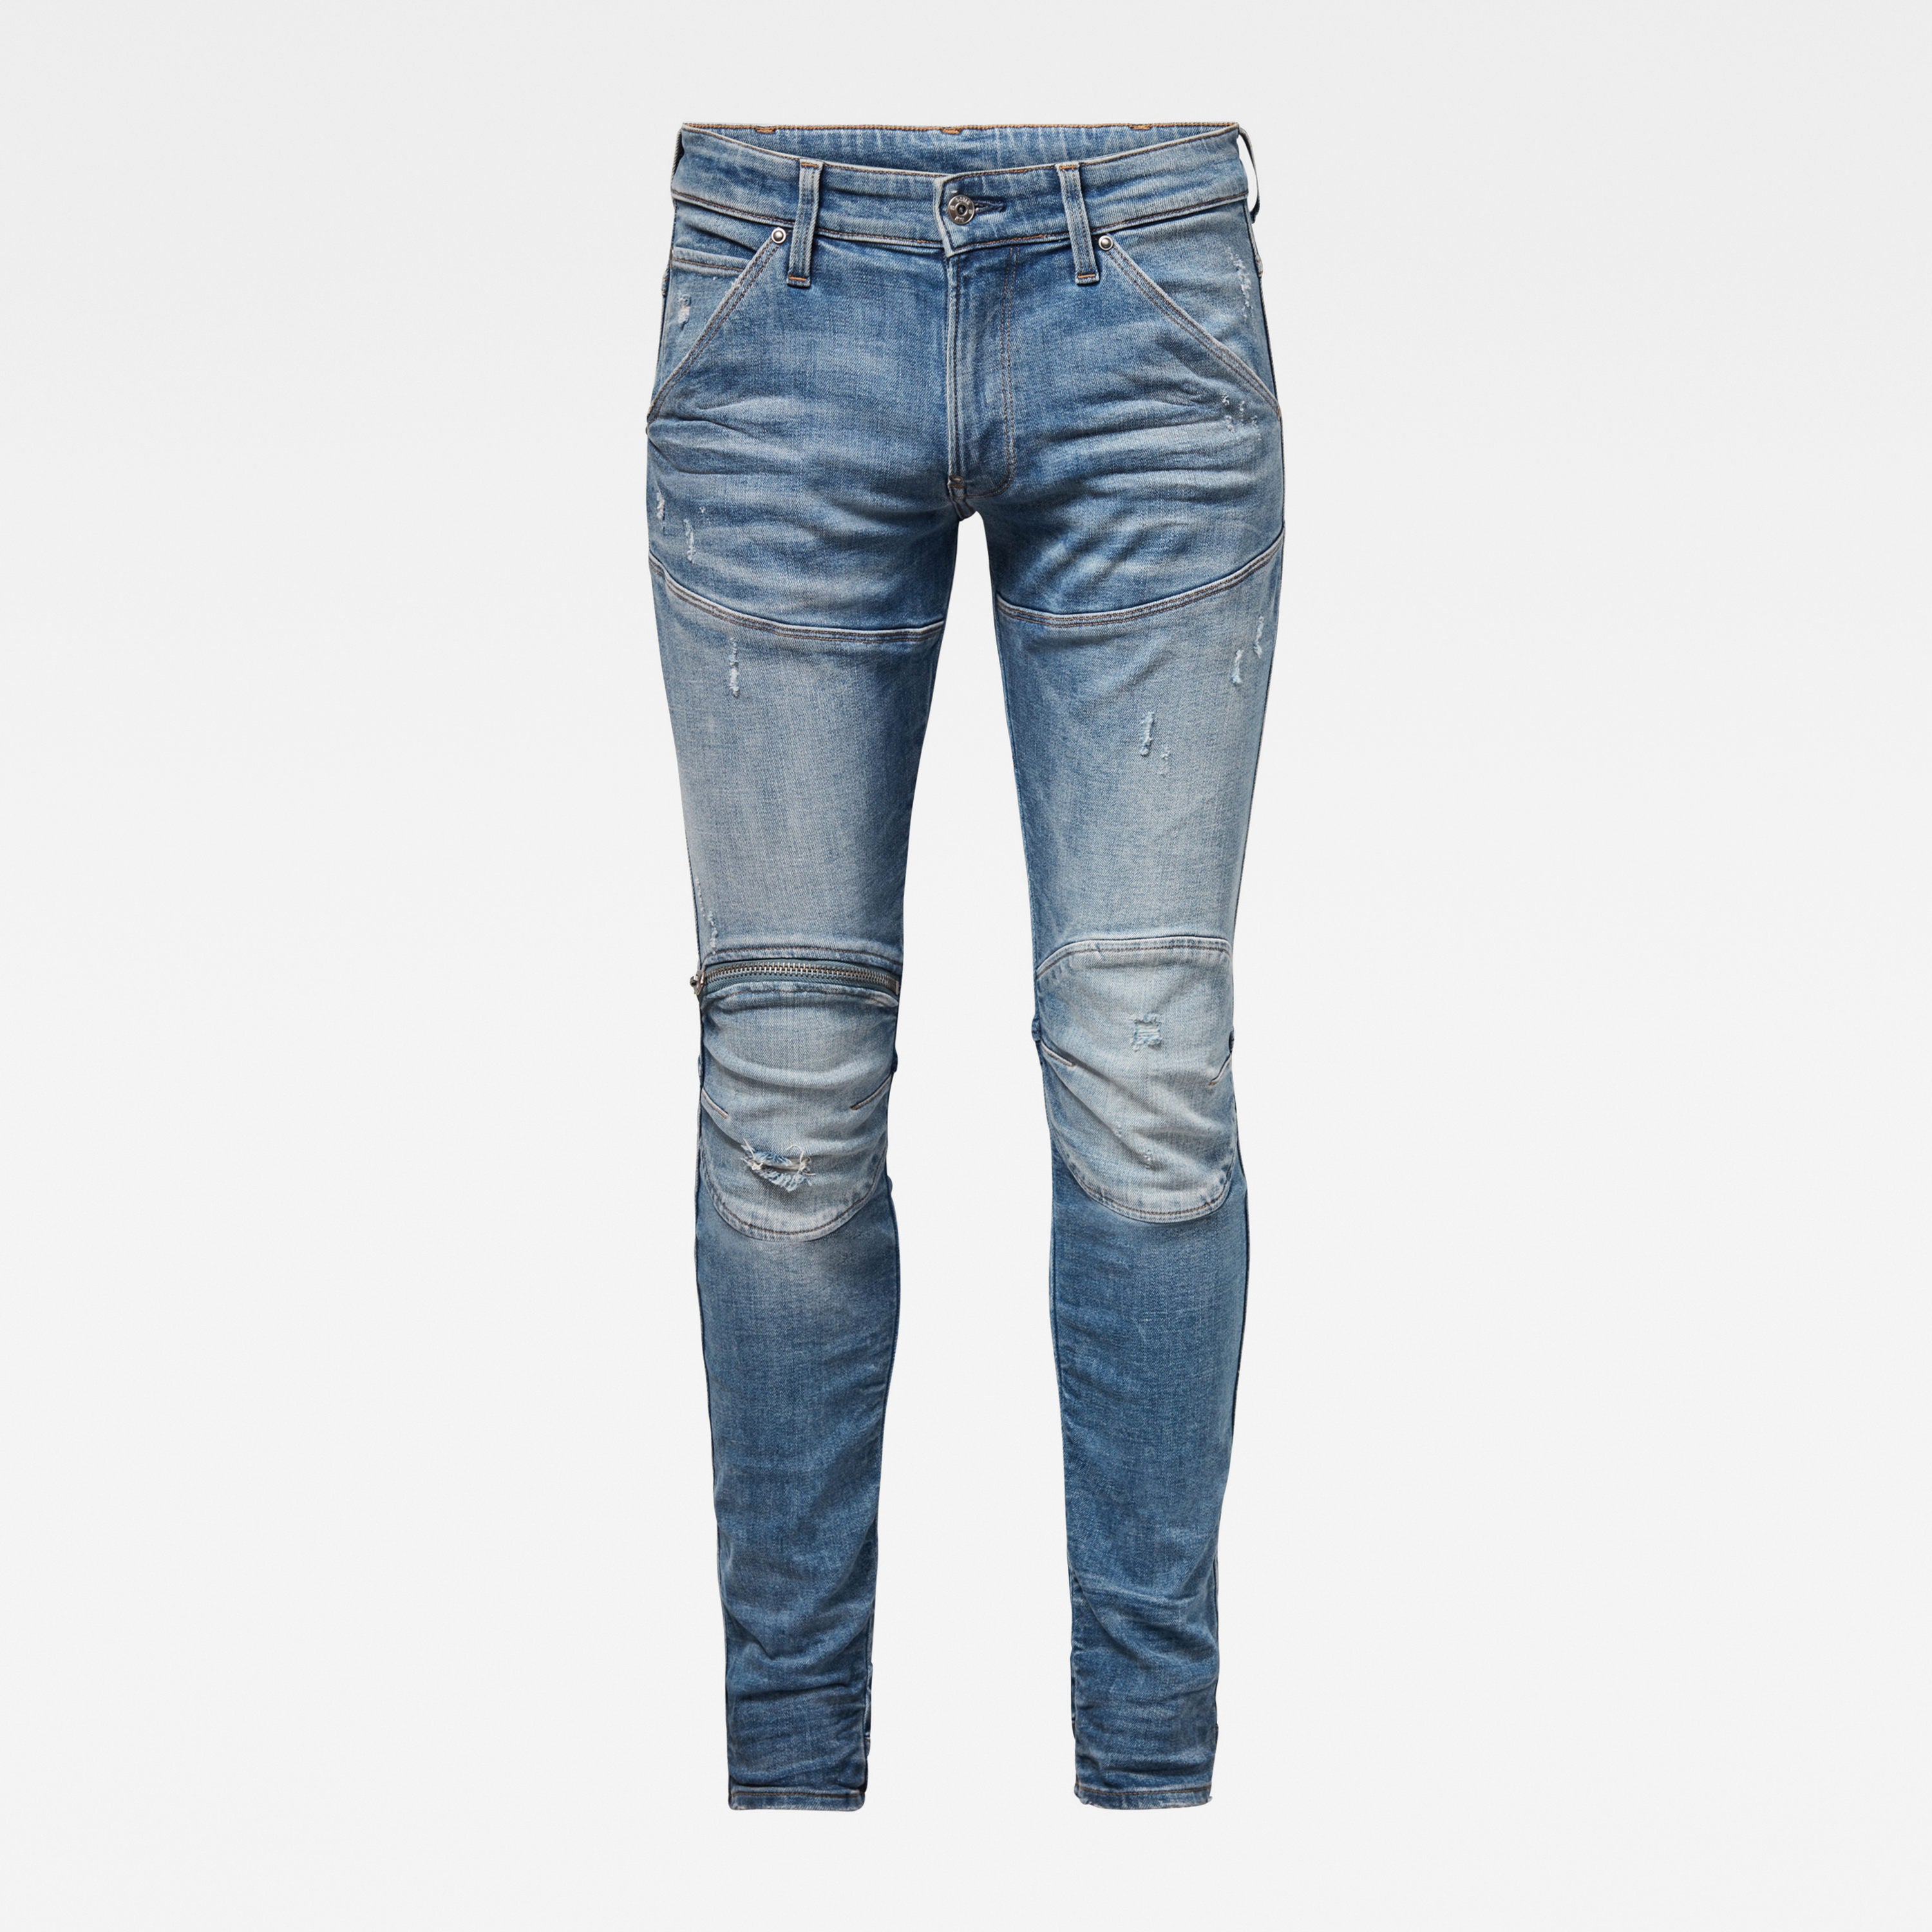 Opstand Verrijking Uitgaven Buy G Star 3D Knee Skinny Men's Blue Jeans Online | InStyle Tuscaloosa –  InStyle-Tuscaloosa